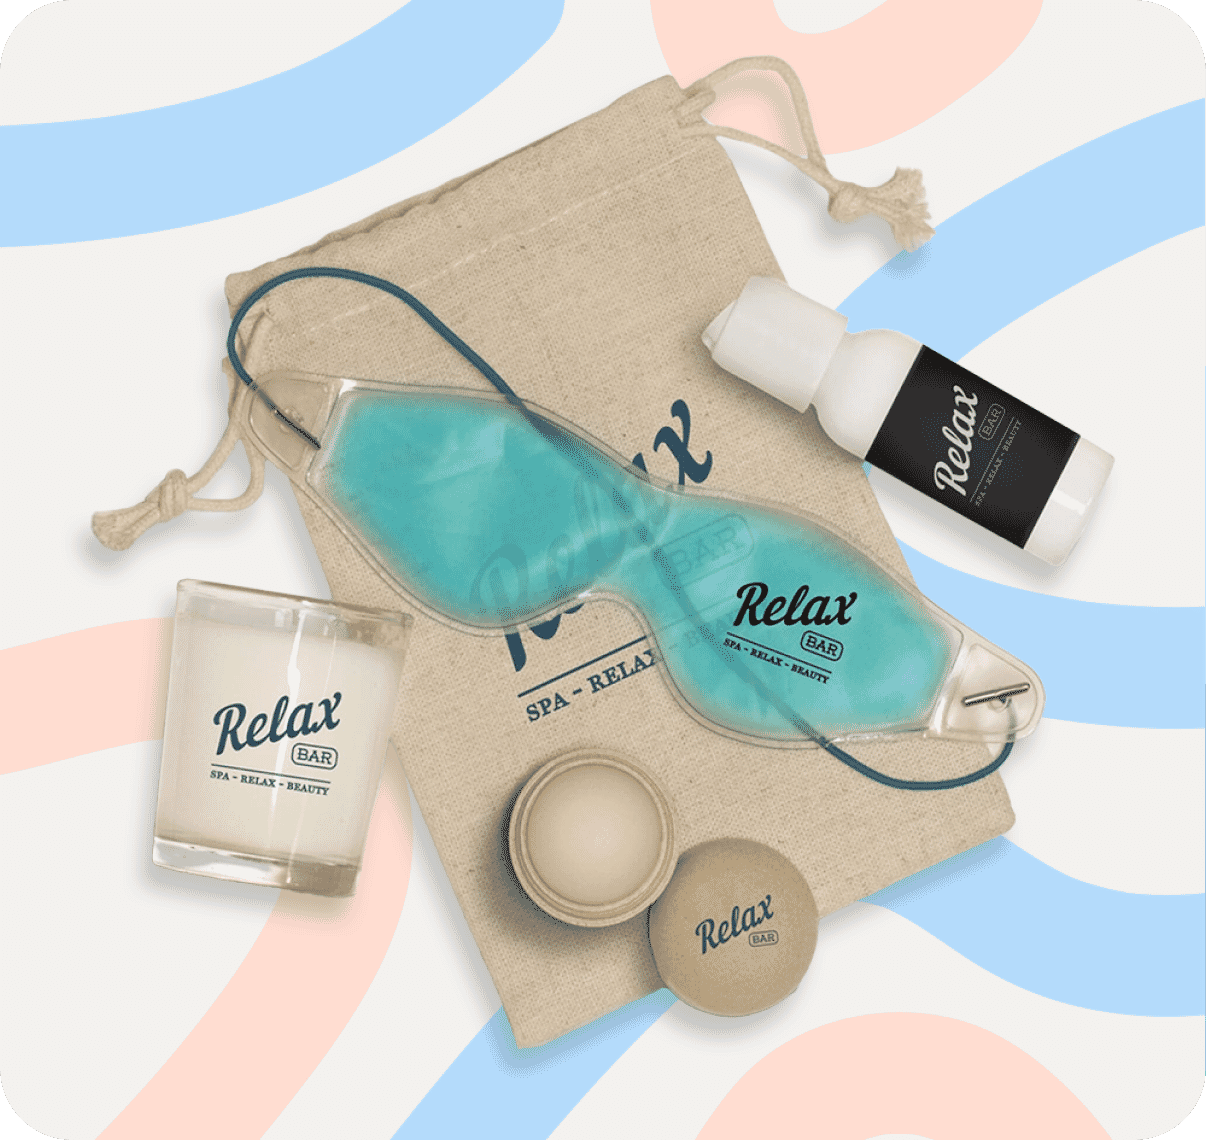 2. Rest and Relax Gift Set